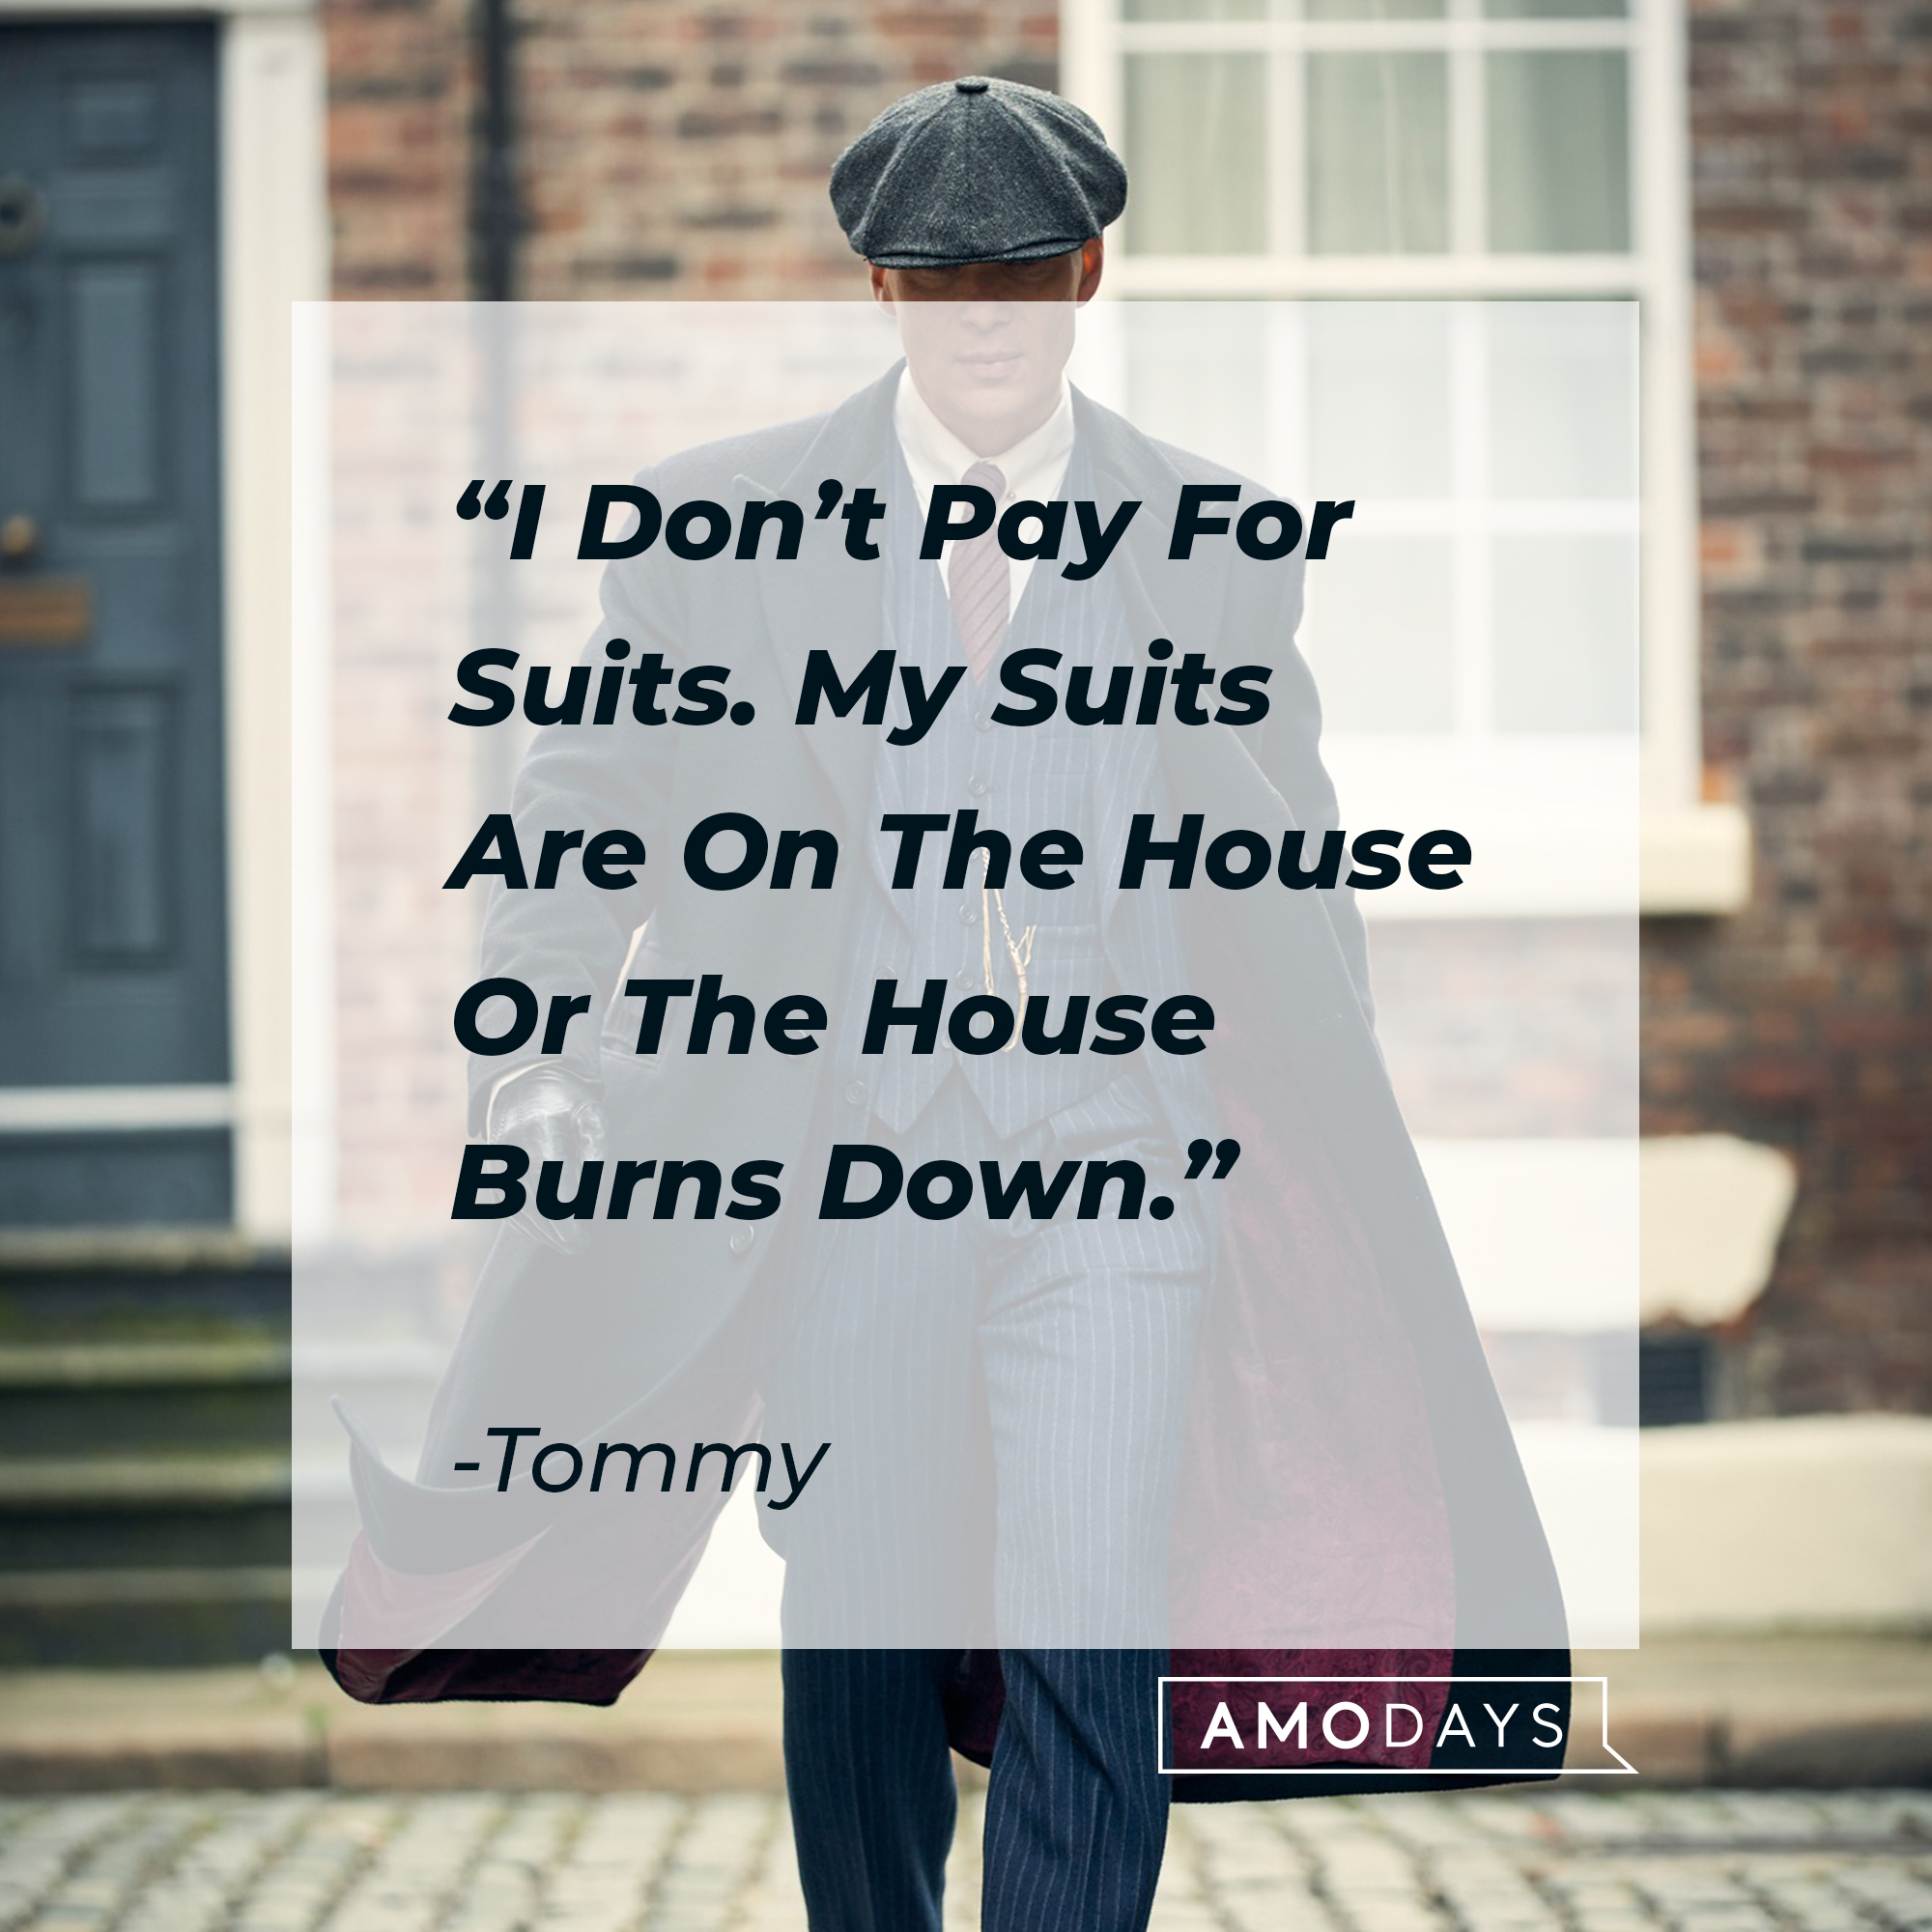 Tommy's quote: "I Don't Pay For Suits. My Suits Are On The House Or The House Burns Down." | Source: facebook.com/PeakyBlinders